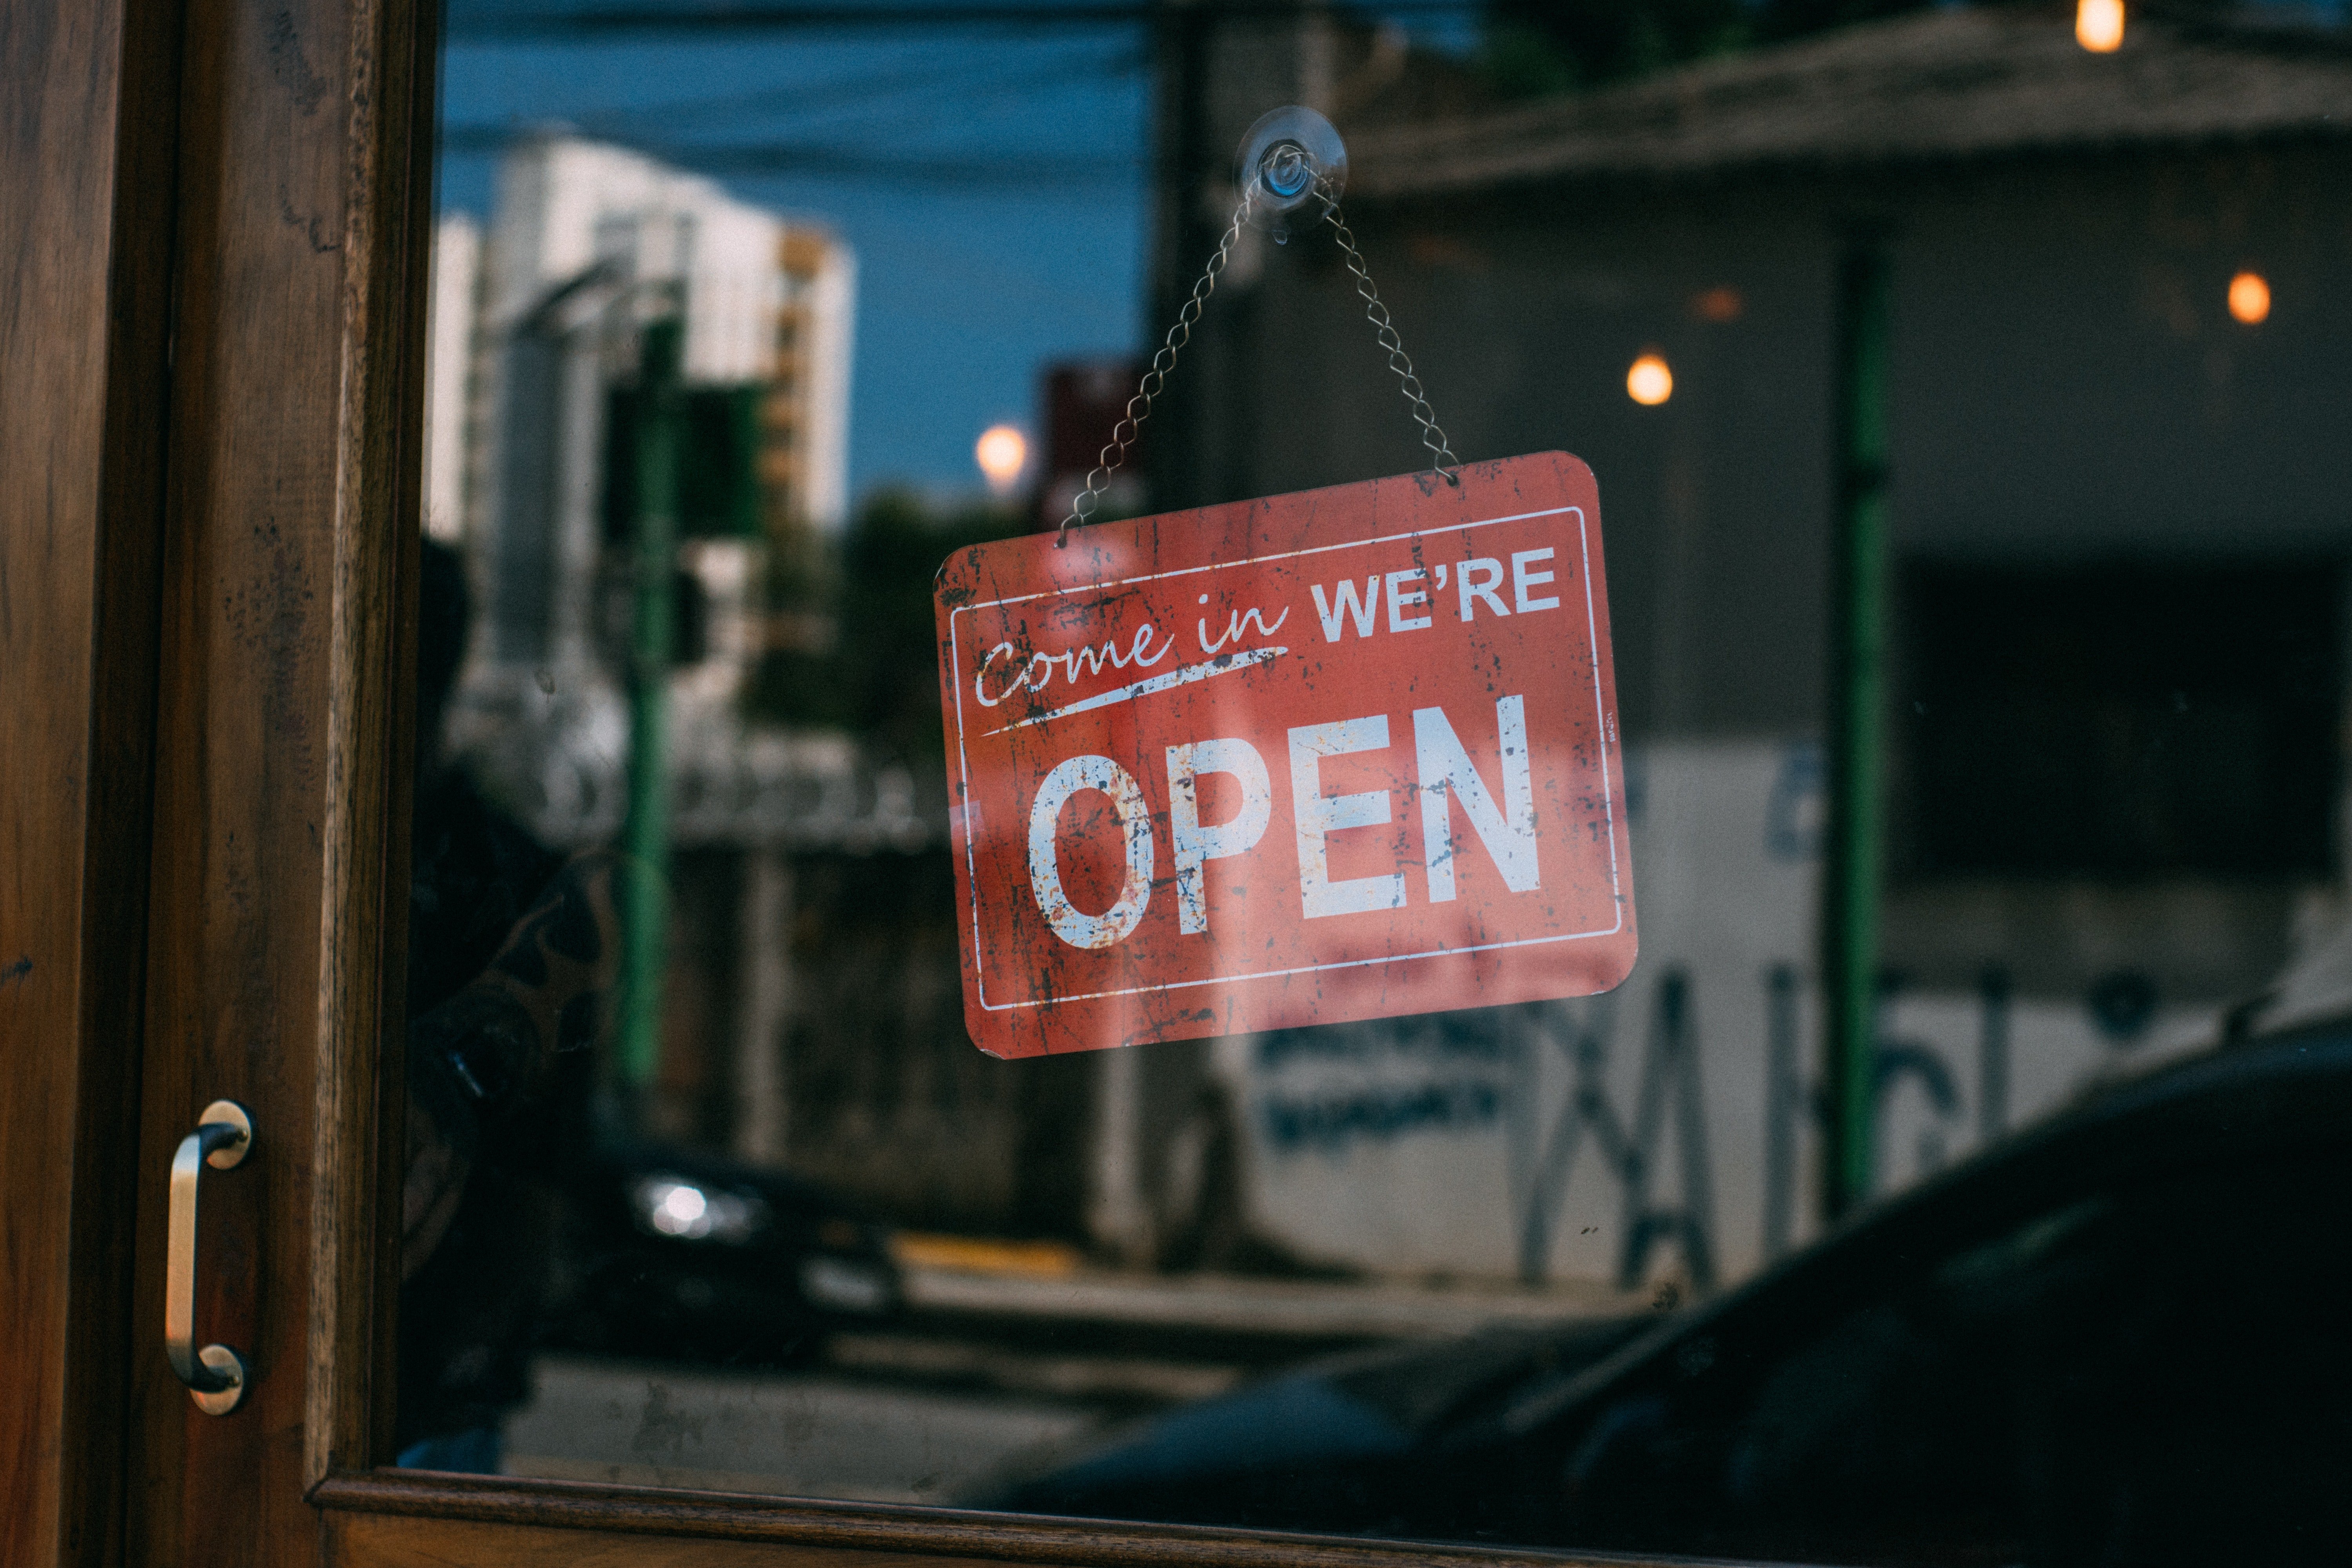 A "we're open" sign on the door of a store. | Photo: Pexels